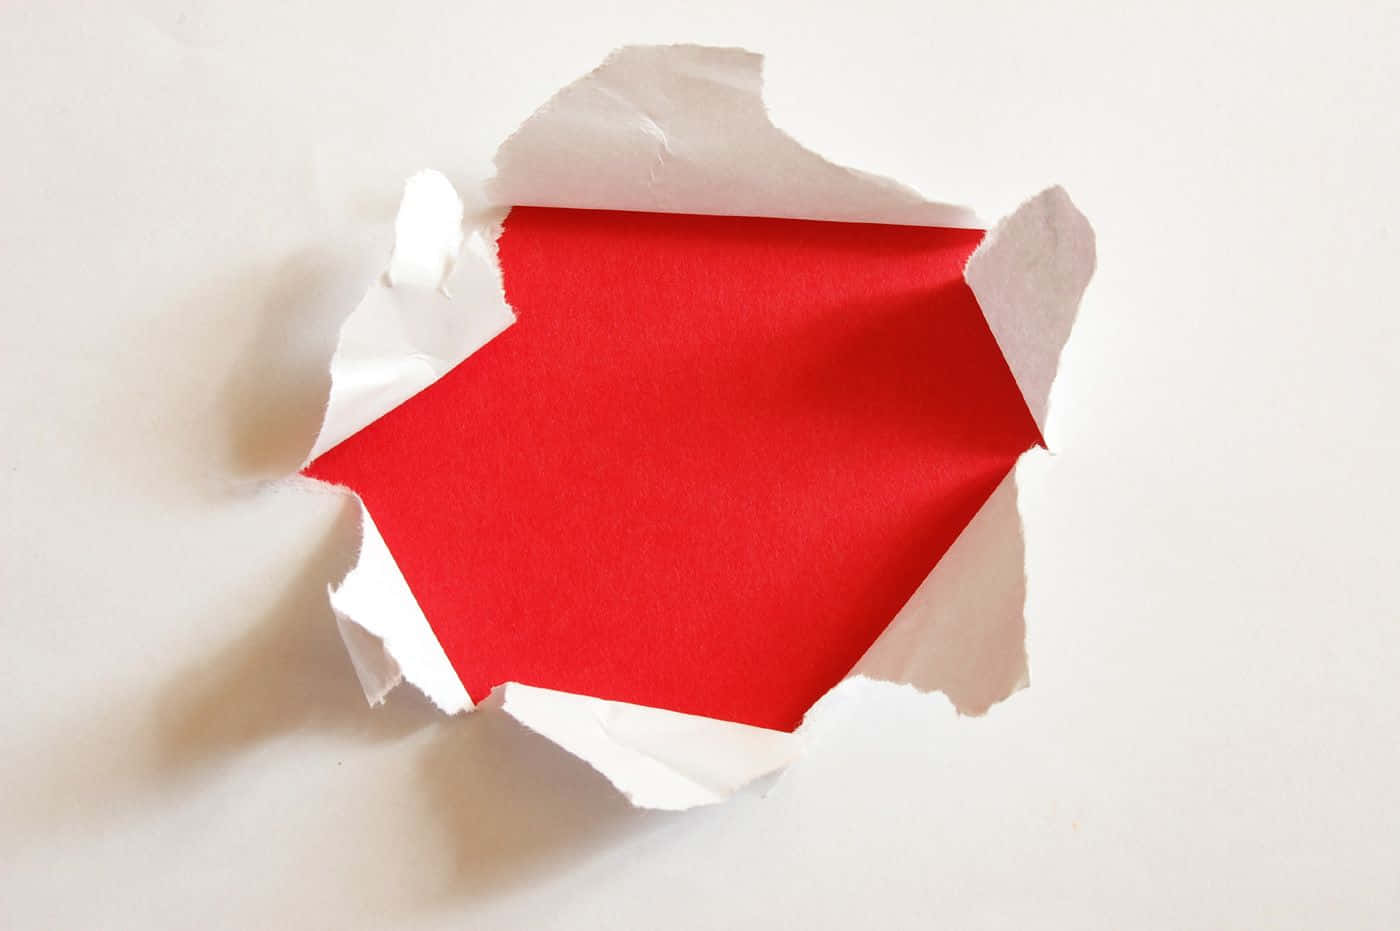 A Red And White Paper Cut Out Of A Sheet Of Paper